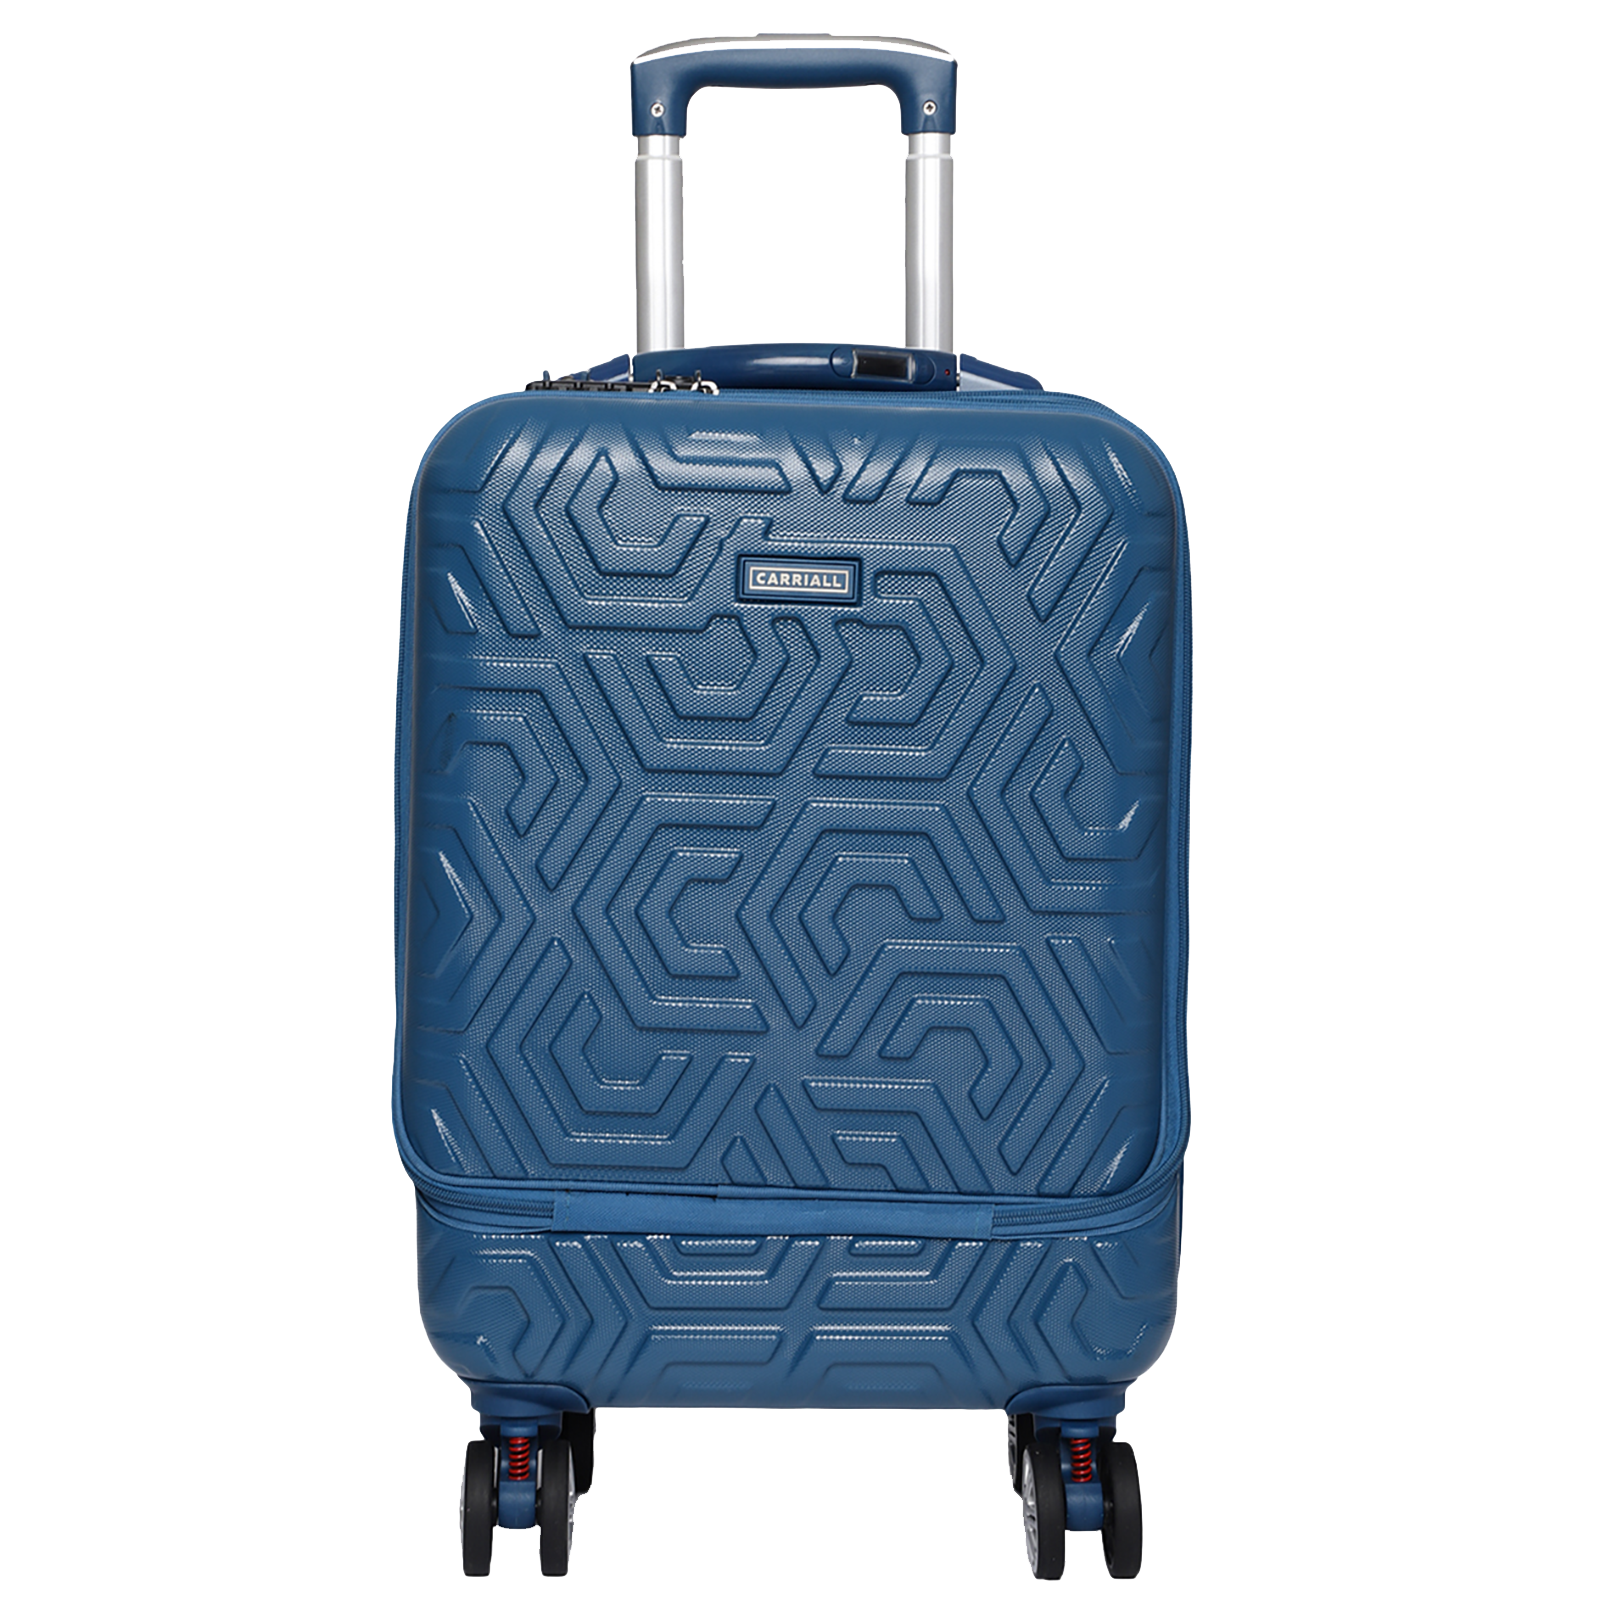 Carriall Hive Polycarbonate Trolley Bag (Built-In Weight Scale, USB Charging Port, CALS0001, Blue)